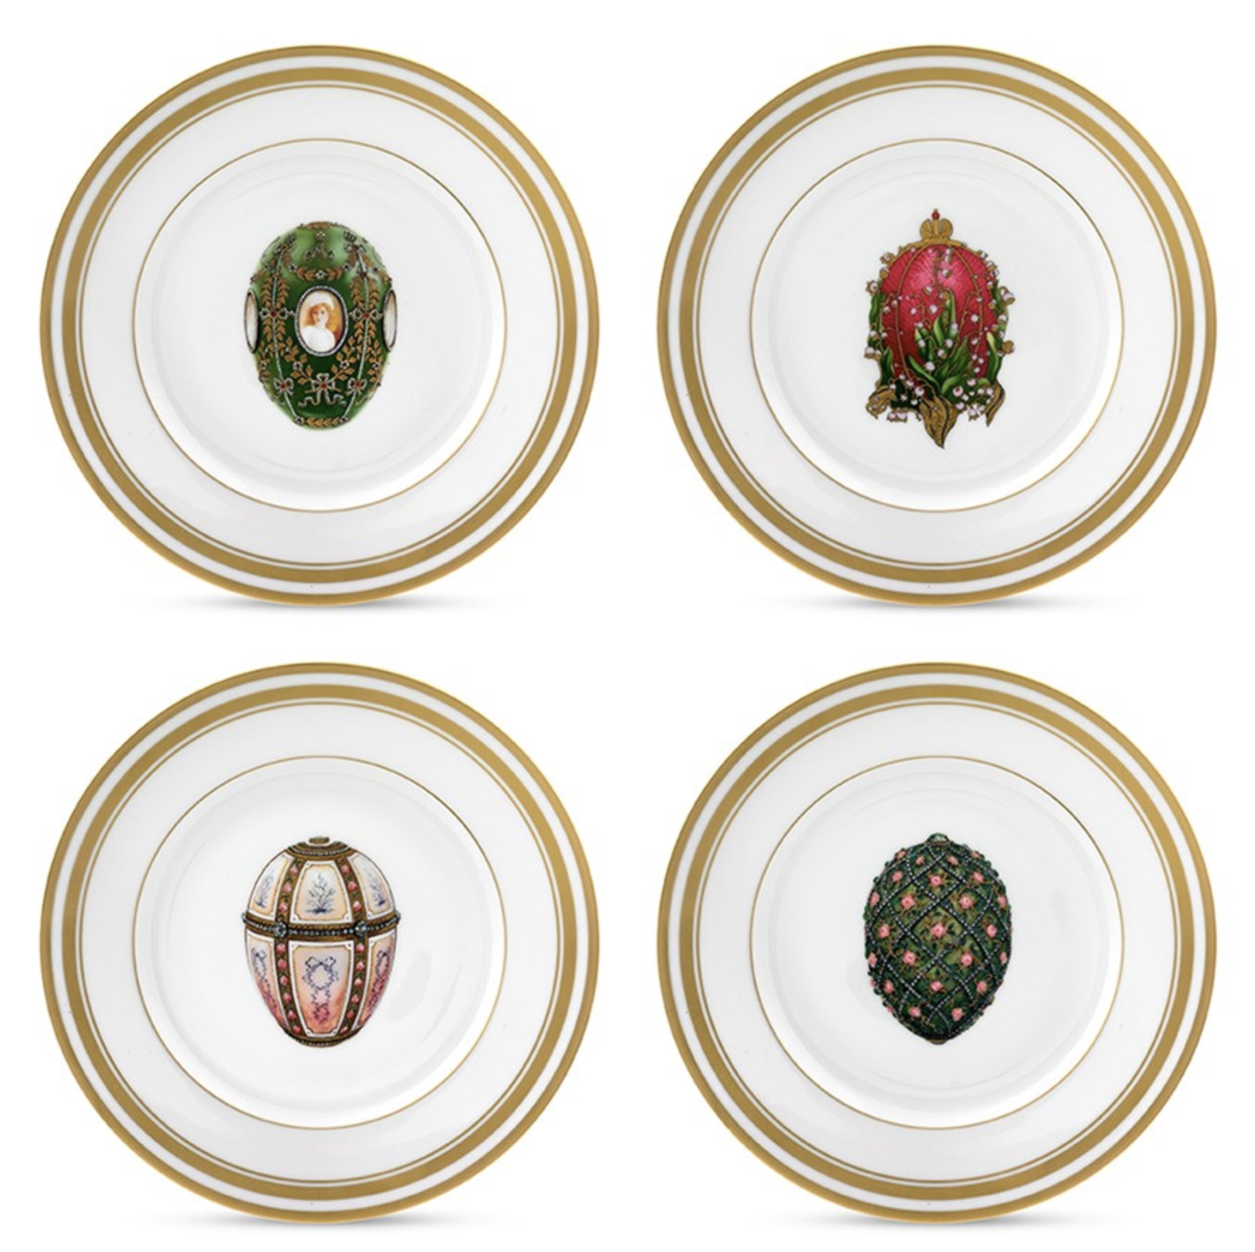 Dessert Plates with Faberge Eggs, Set of 6